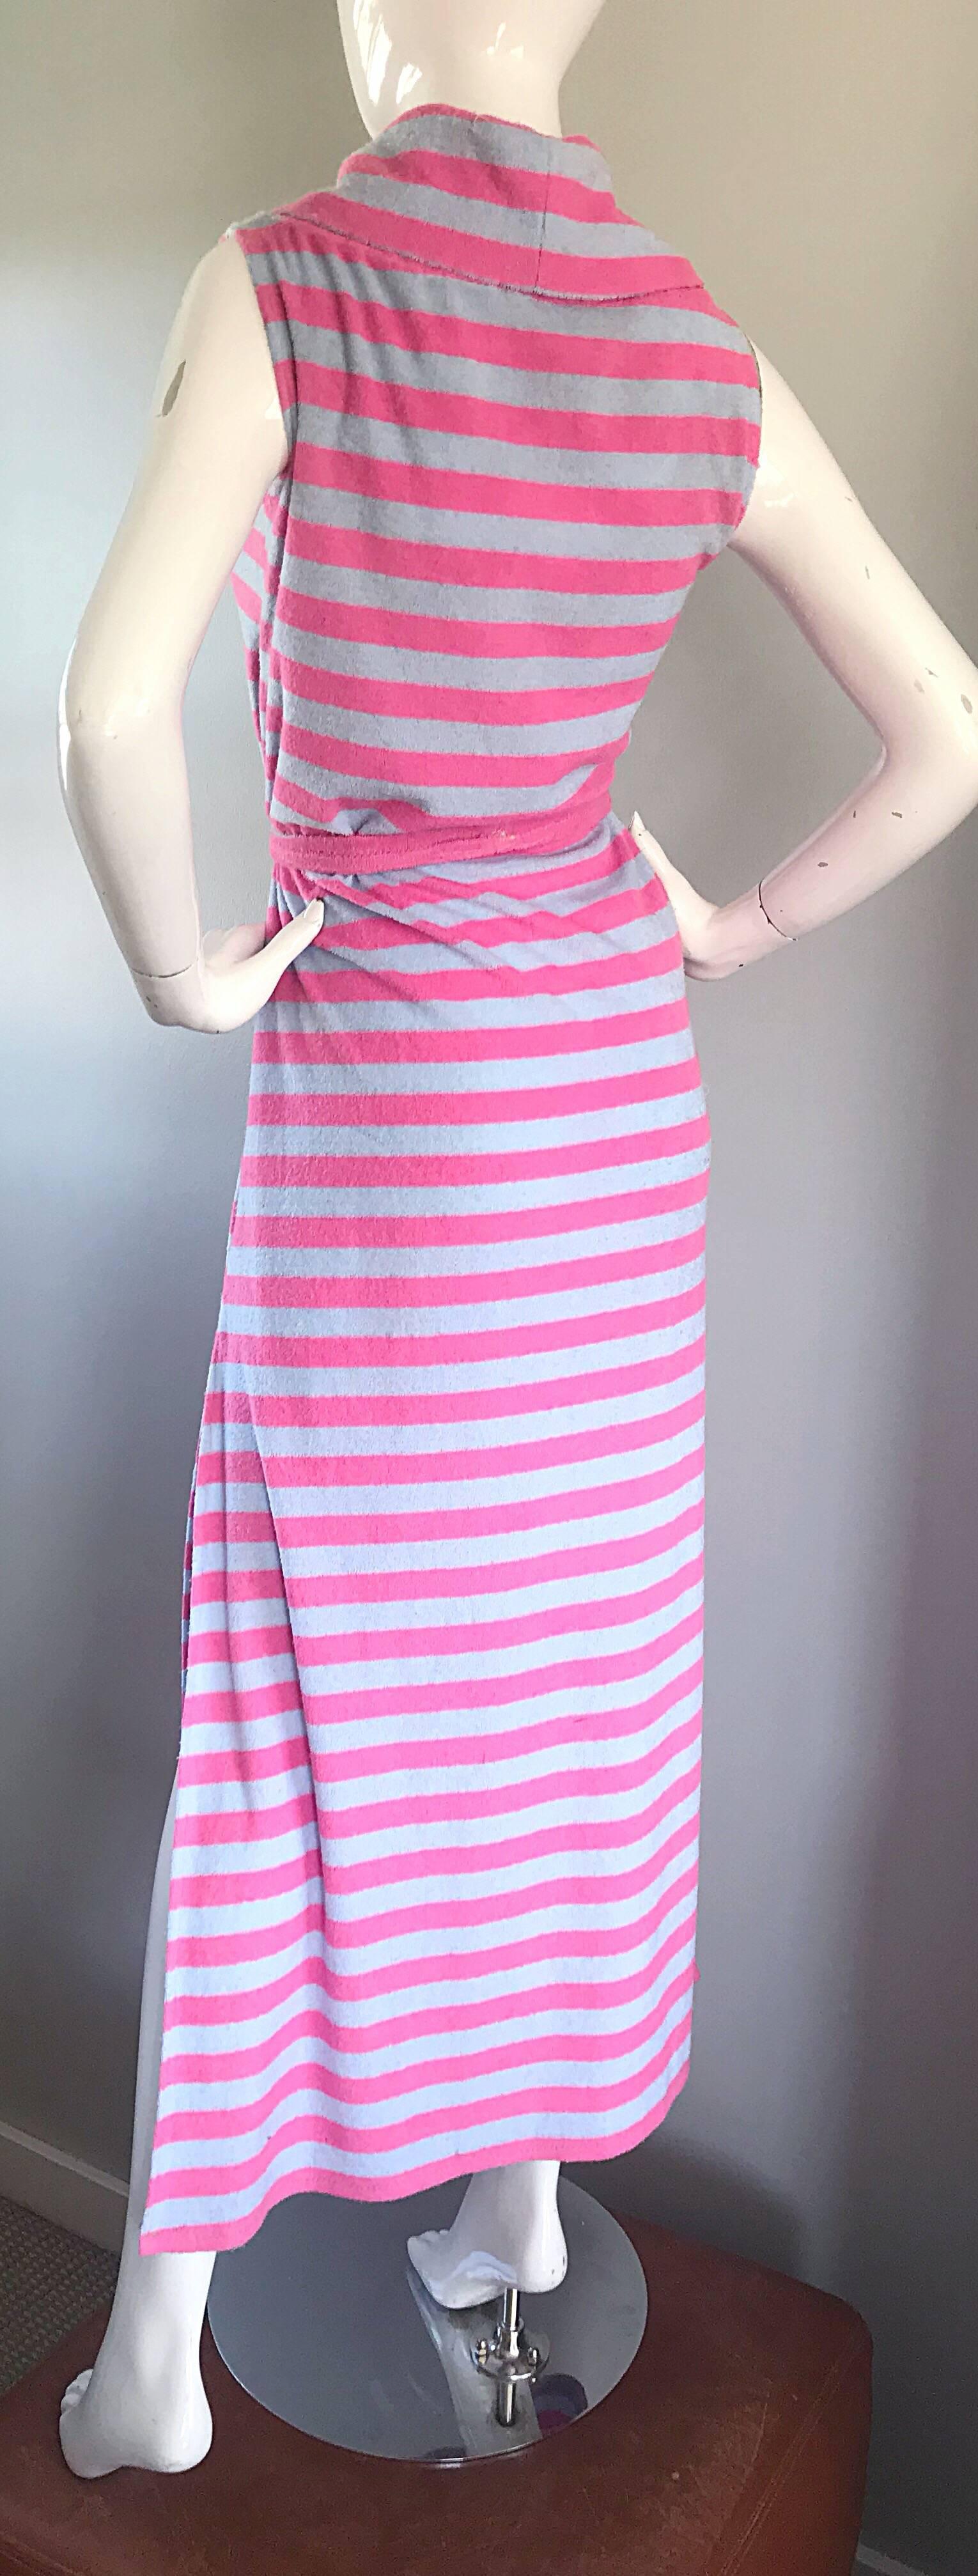 Women's 1970s Pierre Cardin Hot Pink Blue Striped Terry Cloth Belted Vintage Maxi Dress